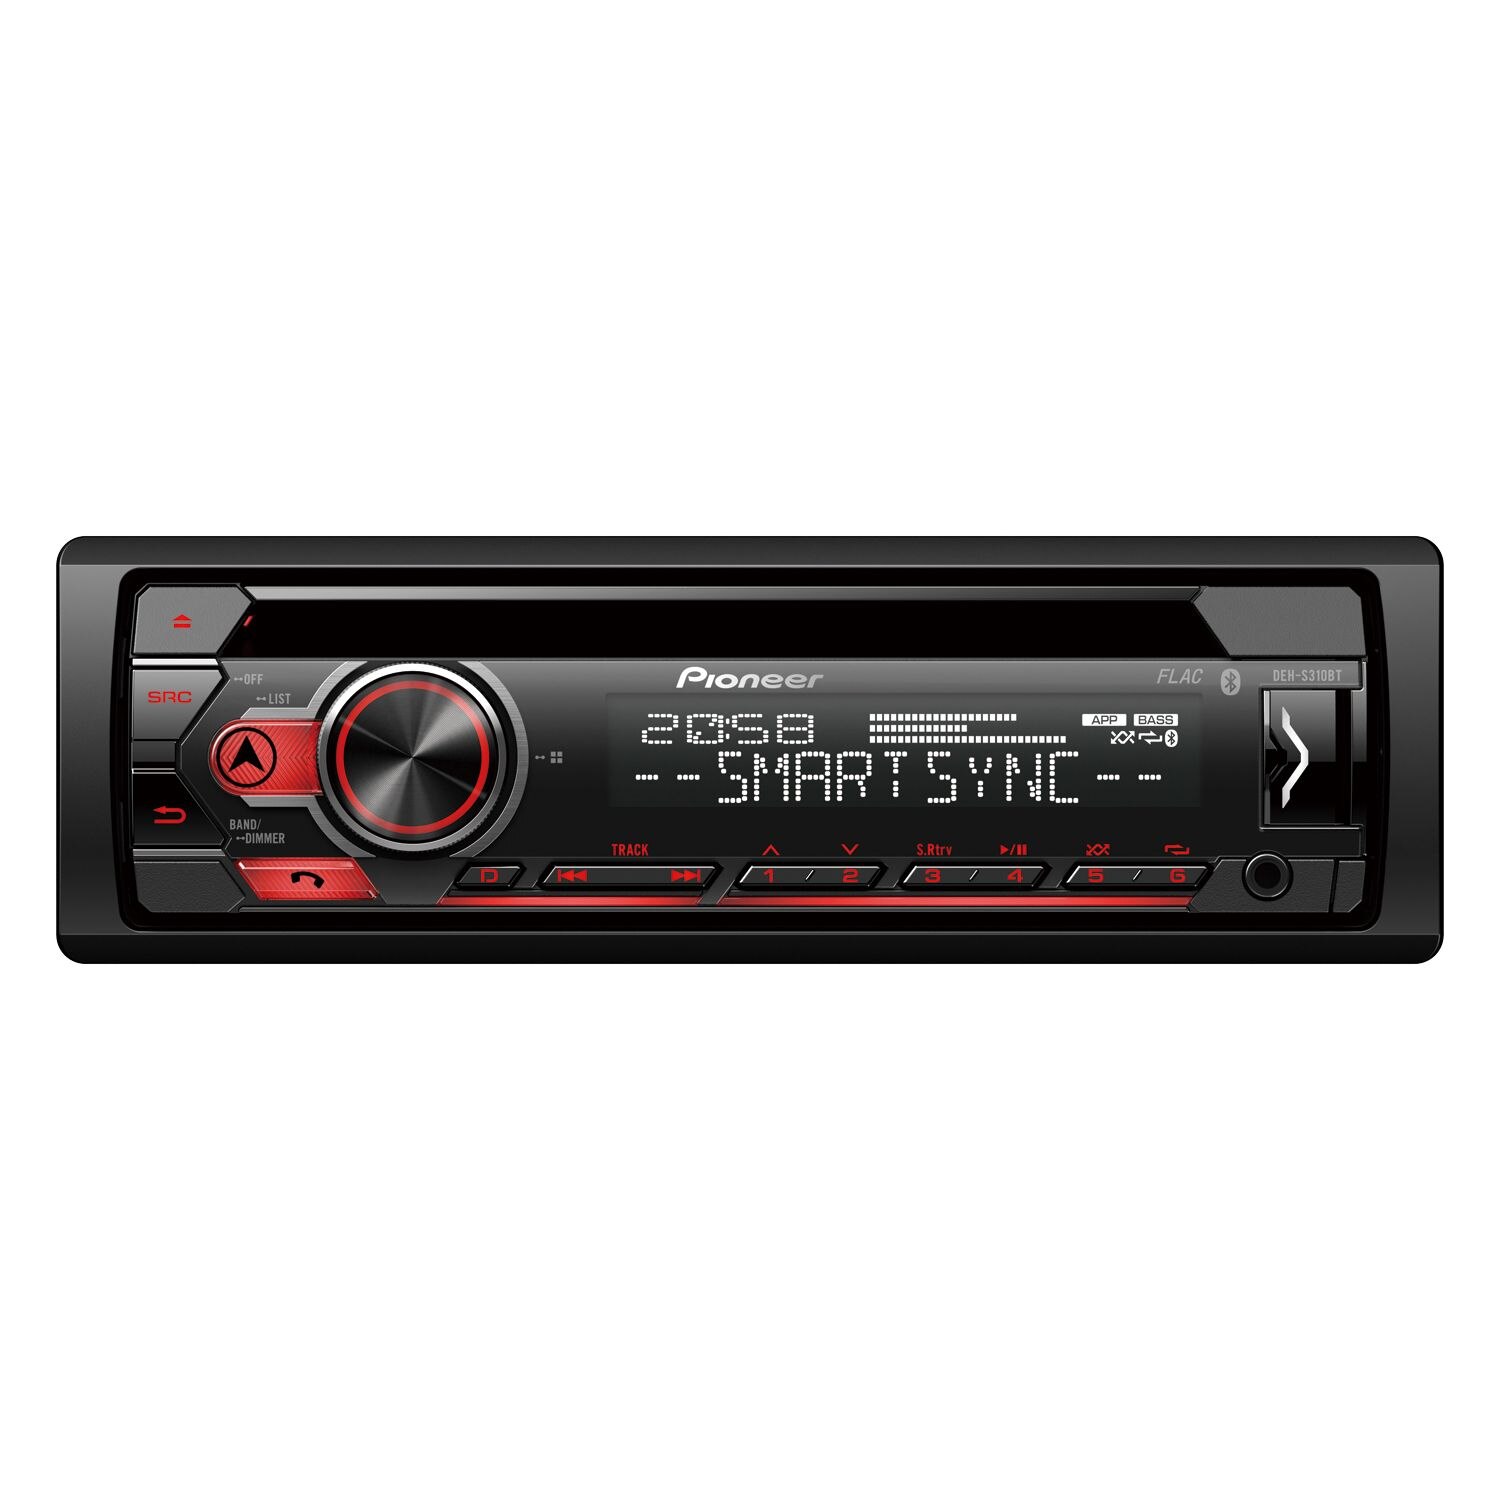 Pioneer DEH-4800FD High Power Car Stereo with RDS Tuner, USB and Aux-in.  Supports iPod/iPhone and Direct Control.